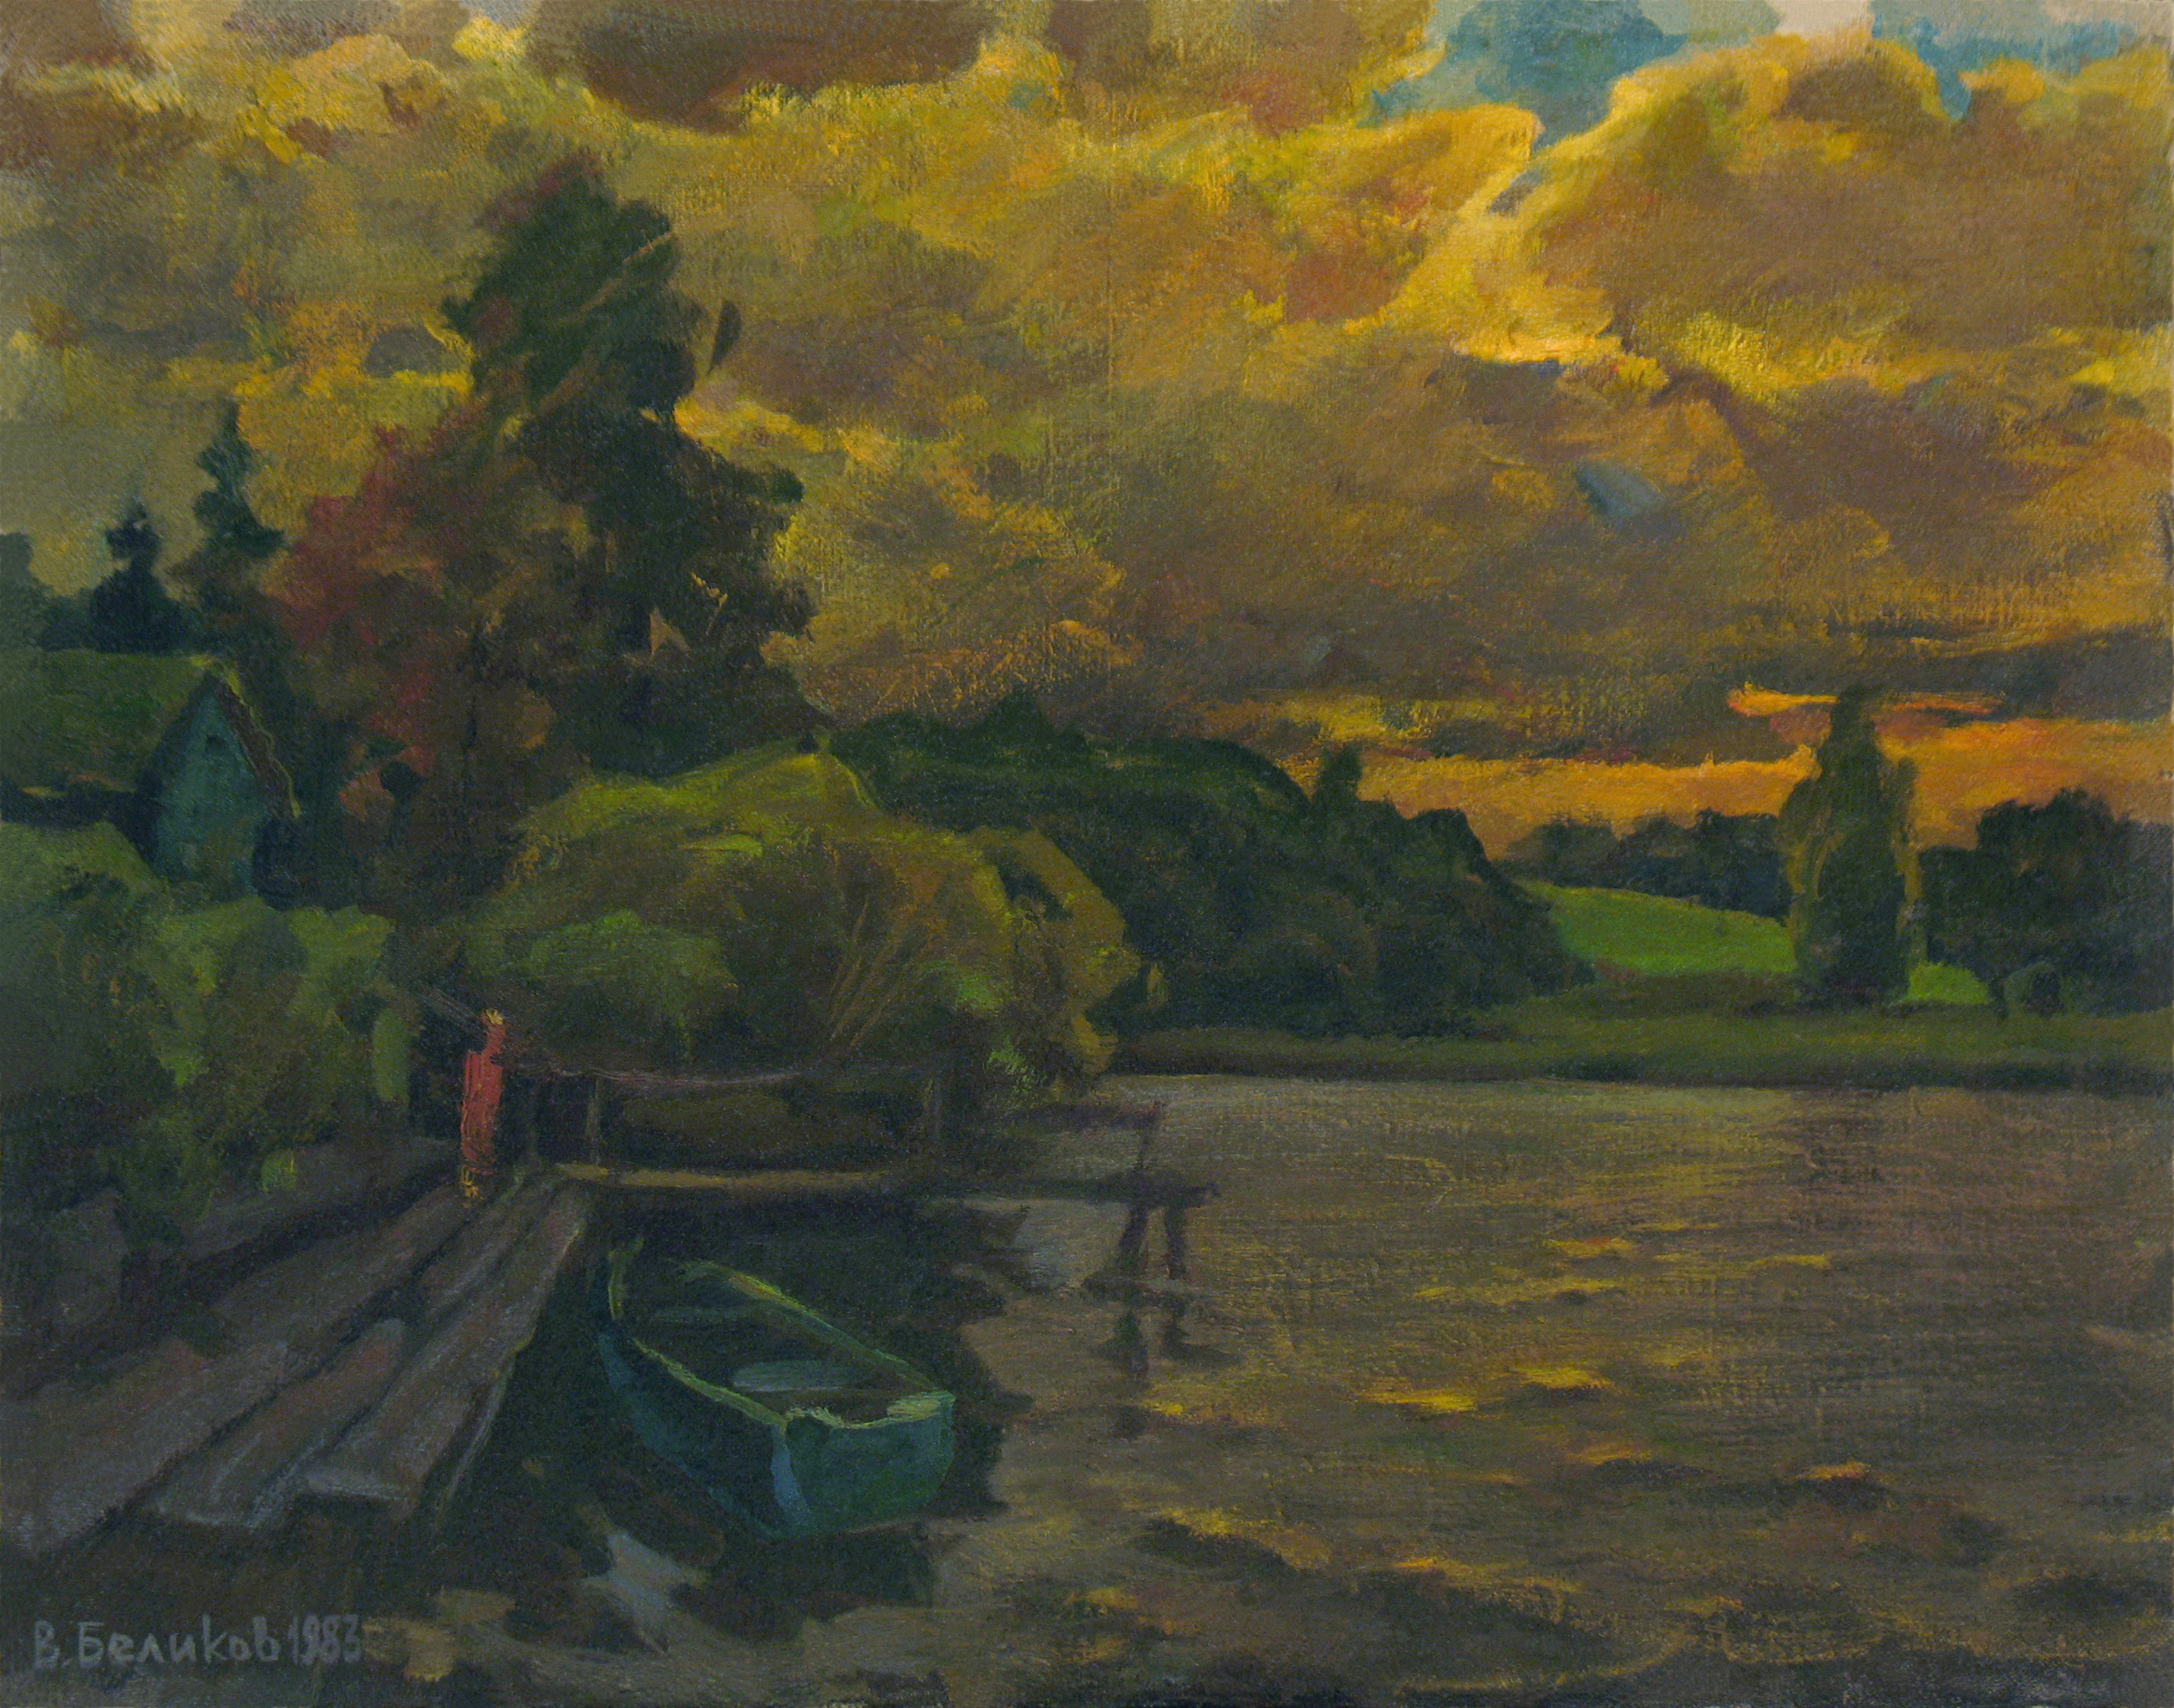 Sergey Belikov; Boat At Sunset, 1983, Original Painting Oil, 52 x 41 cm. Artwork description: 241 Original oil painting on canvas, landscape in impressionistic style with the view of summer evening and boat on the water...